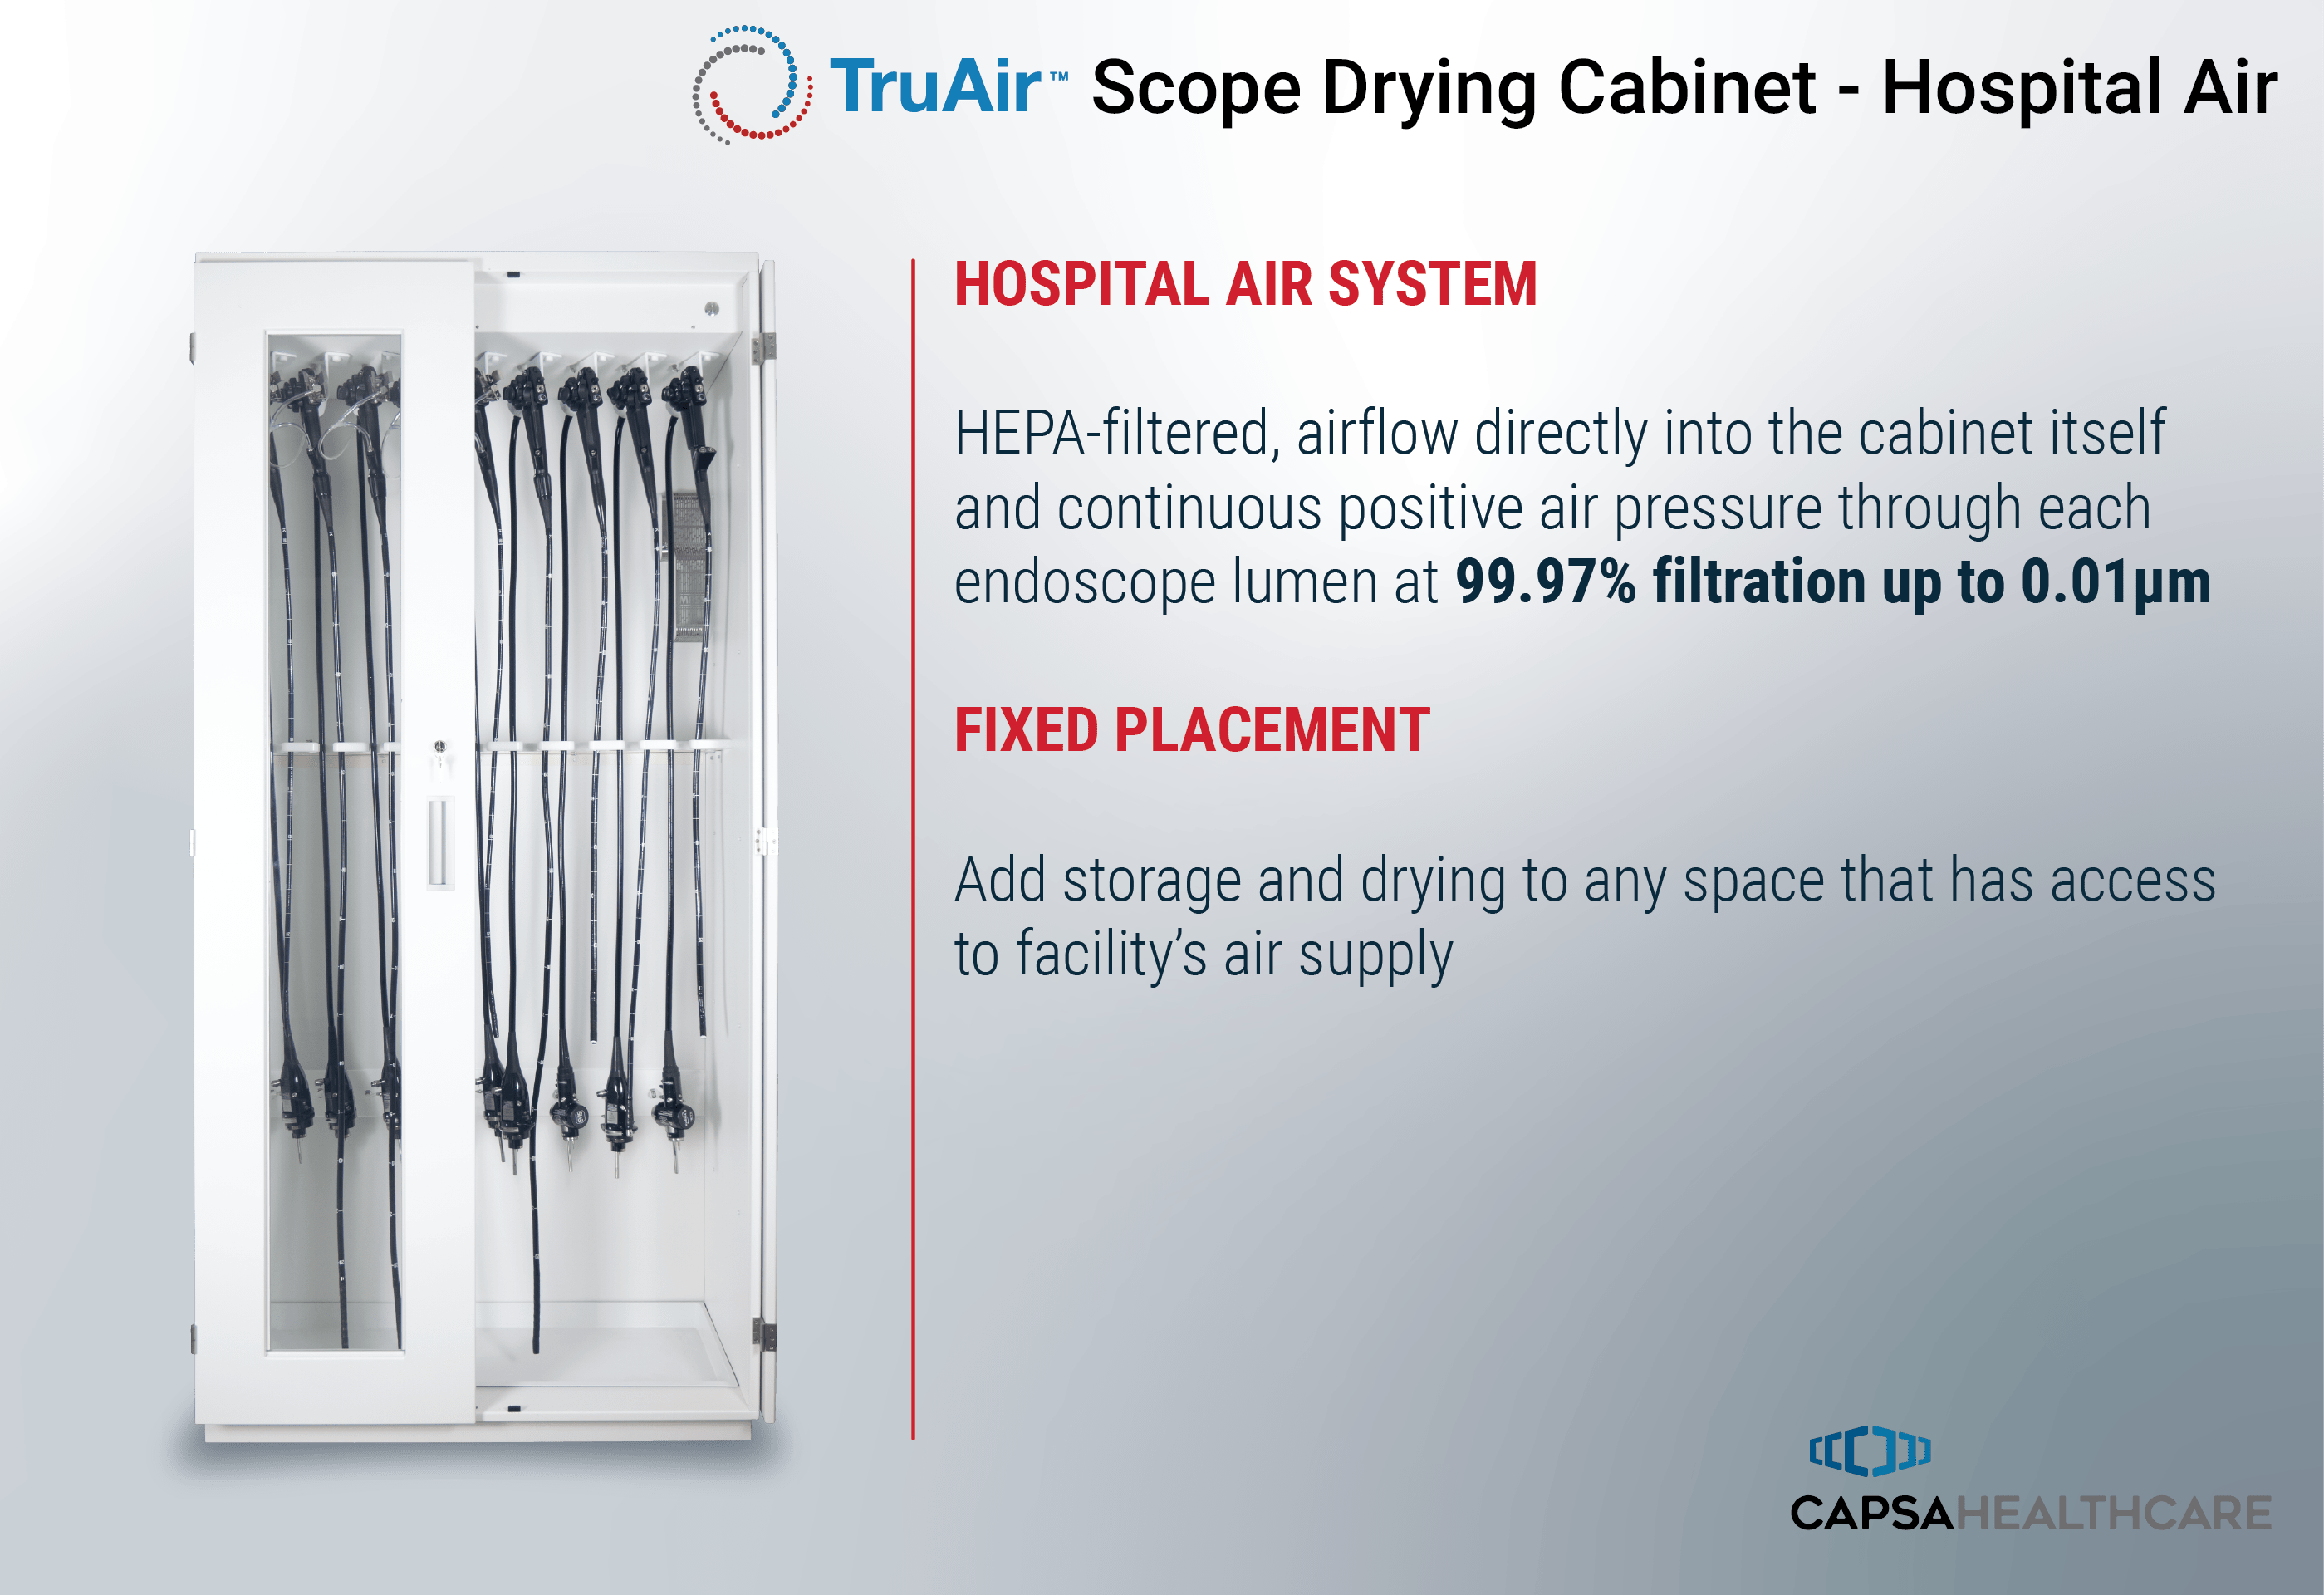 TruAir Scope Drying Cabinet - Hospital Air Overview